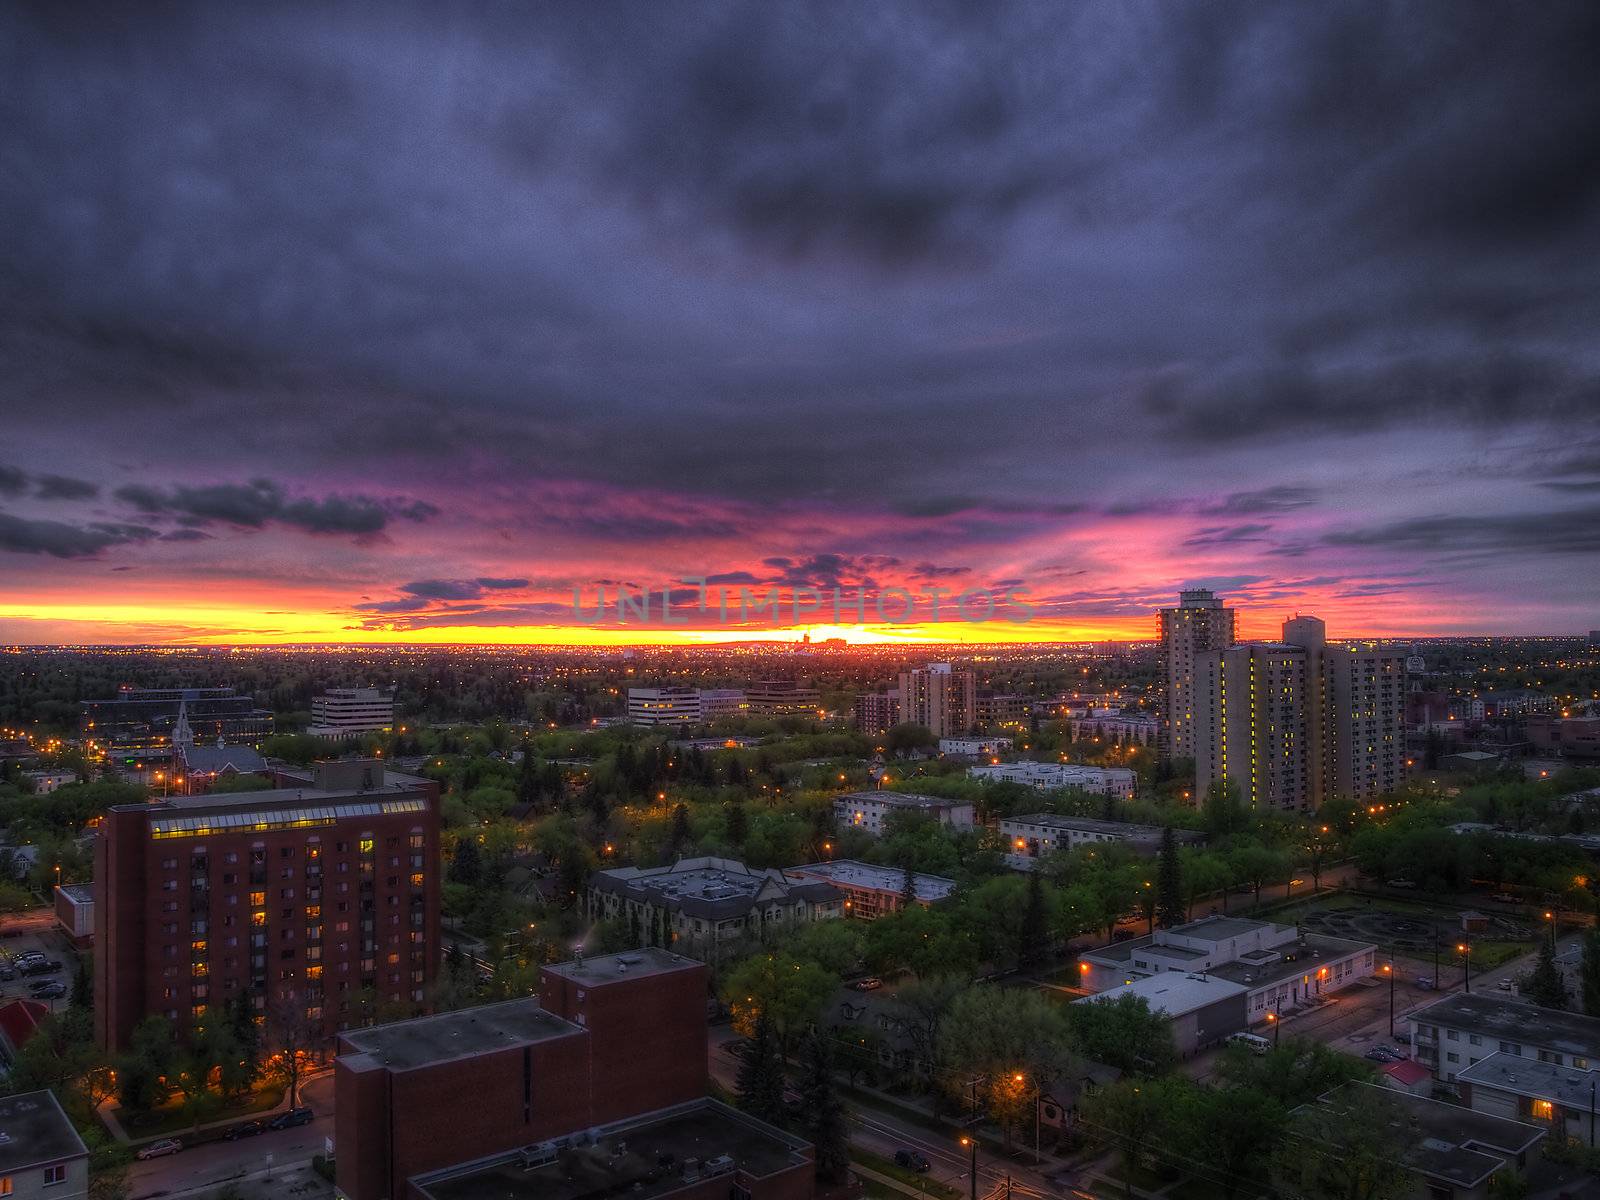 This photo of Edmonton was created from 4 different exposures with Photomatix. The brilliant yellow and magenta shine through as the storm clouds move over the city.